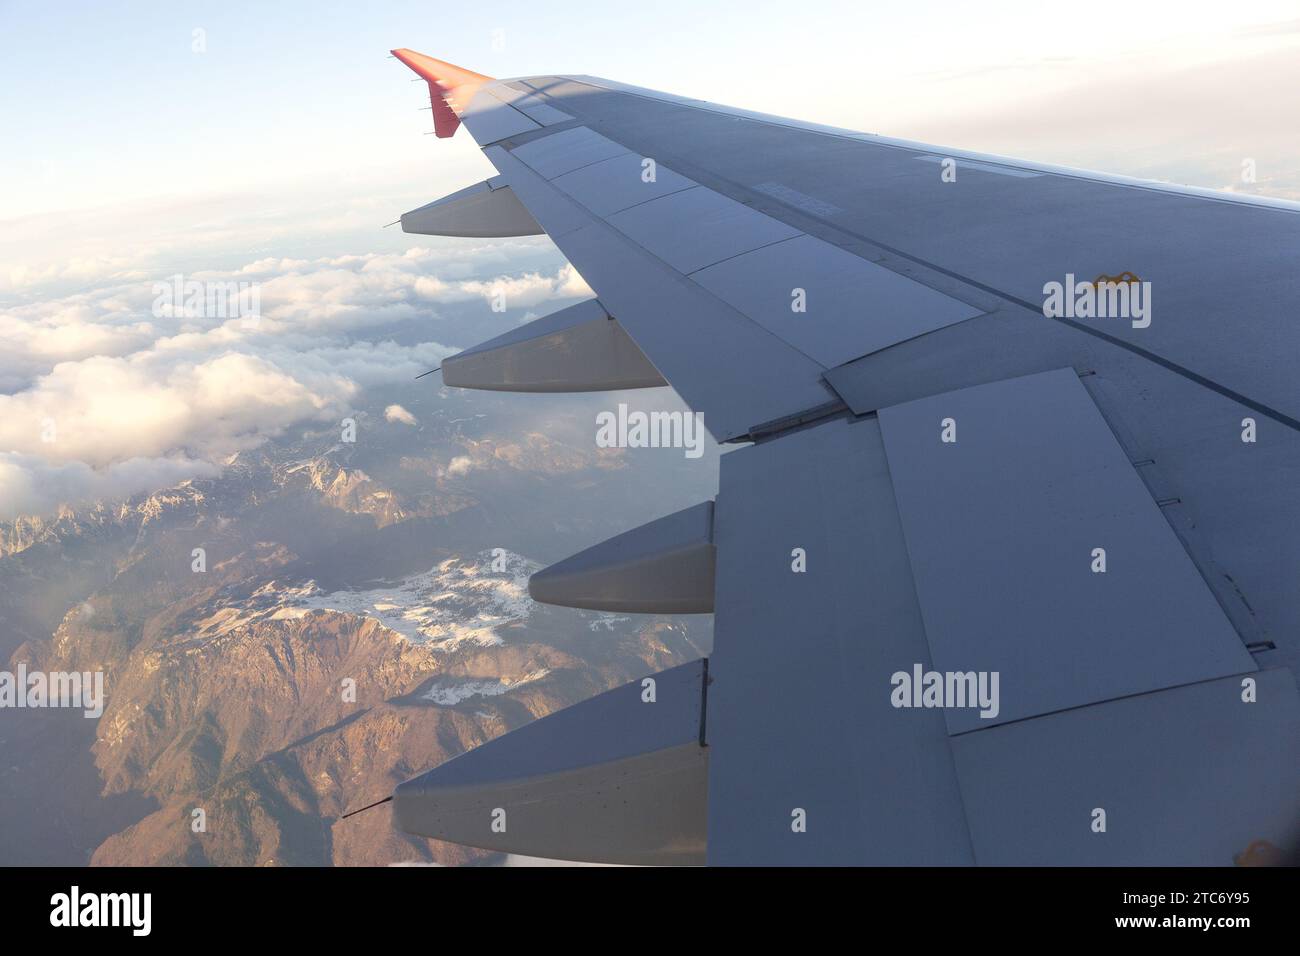 Airplane wing during flight Stock Photo